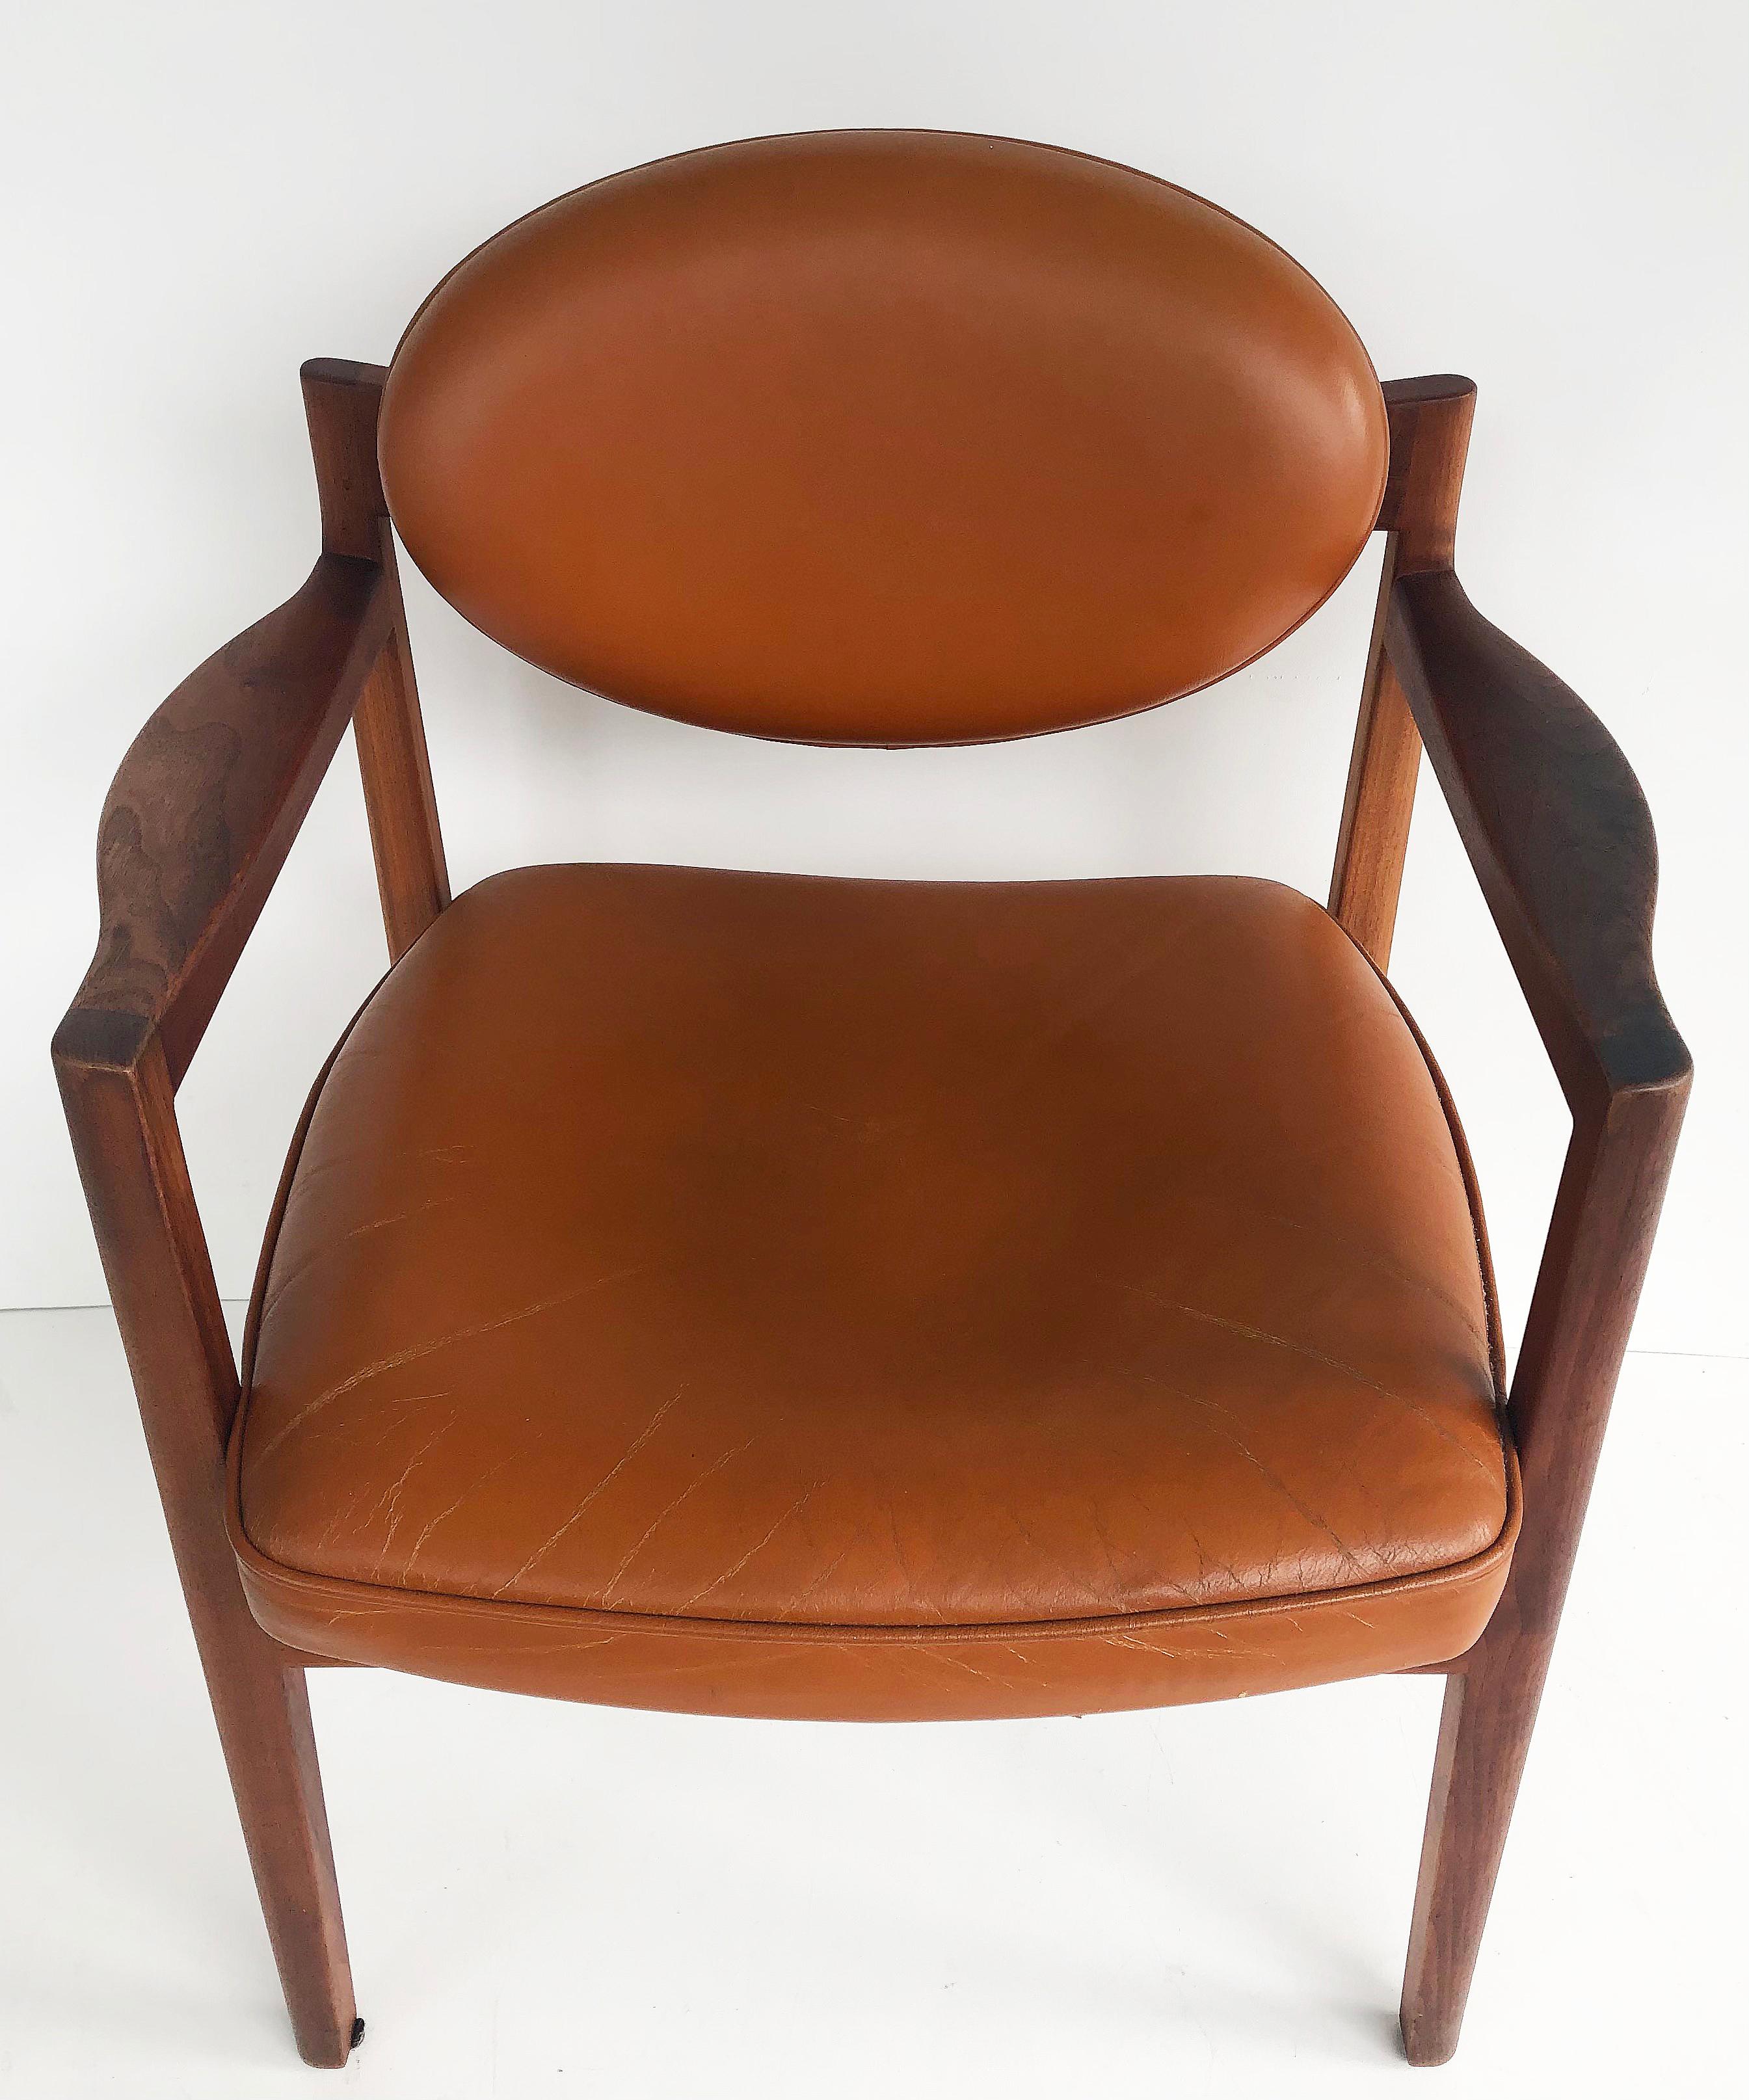 Jens Risom Design Pair of Oiled Walnut & Leather Upholstered Armchairs, c.1965 For Sale 4